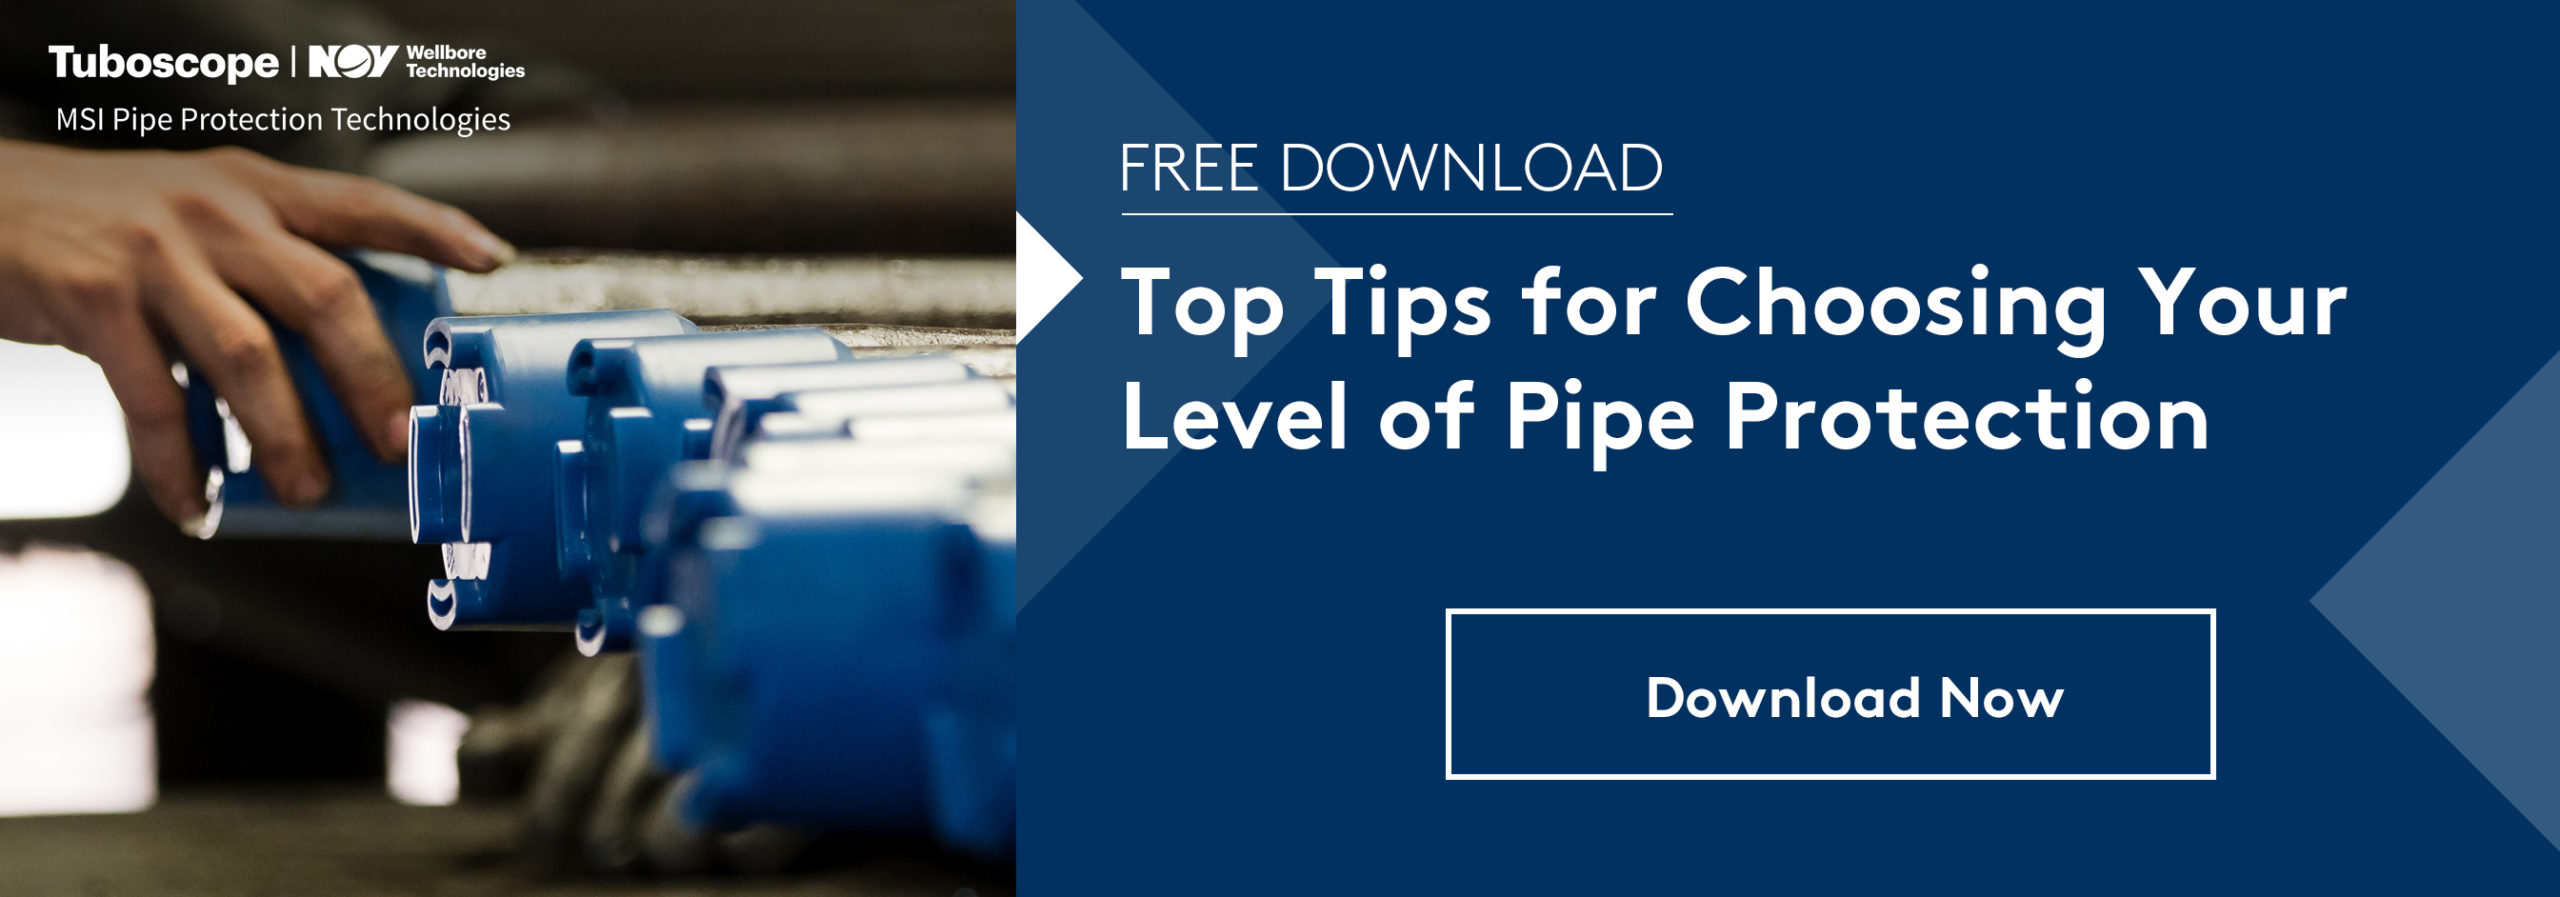 Top Tips for Choosing Pipe Protection